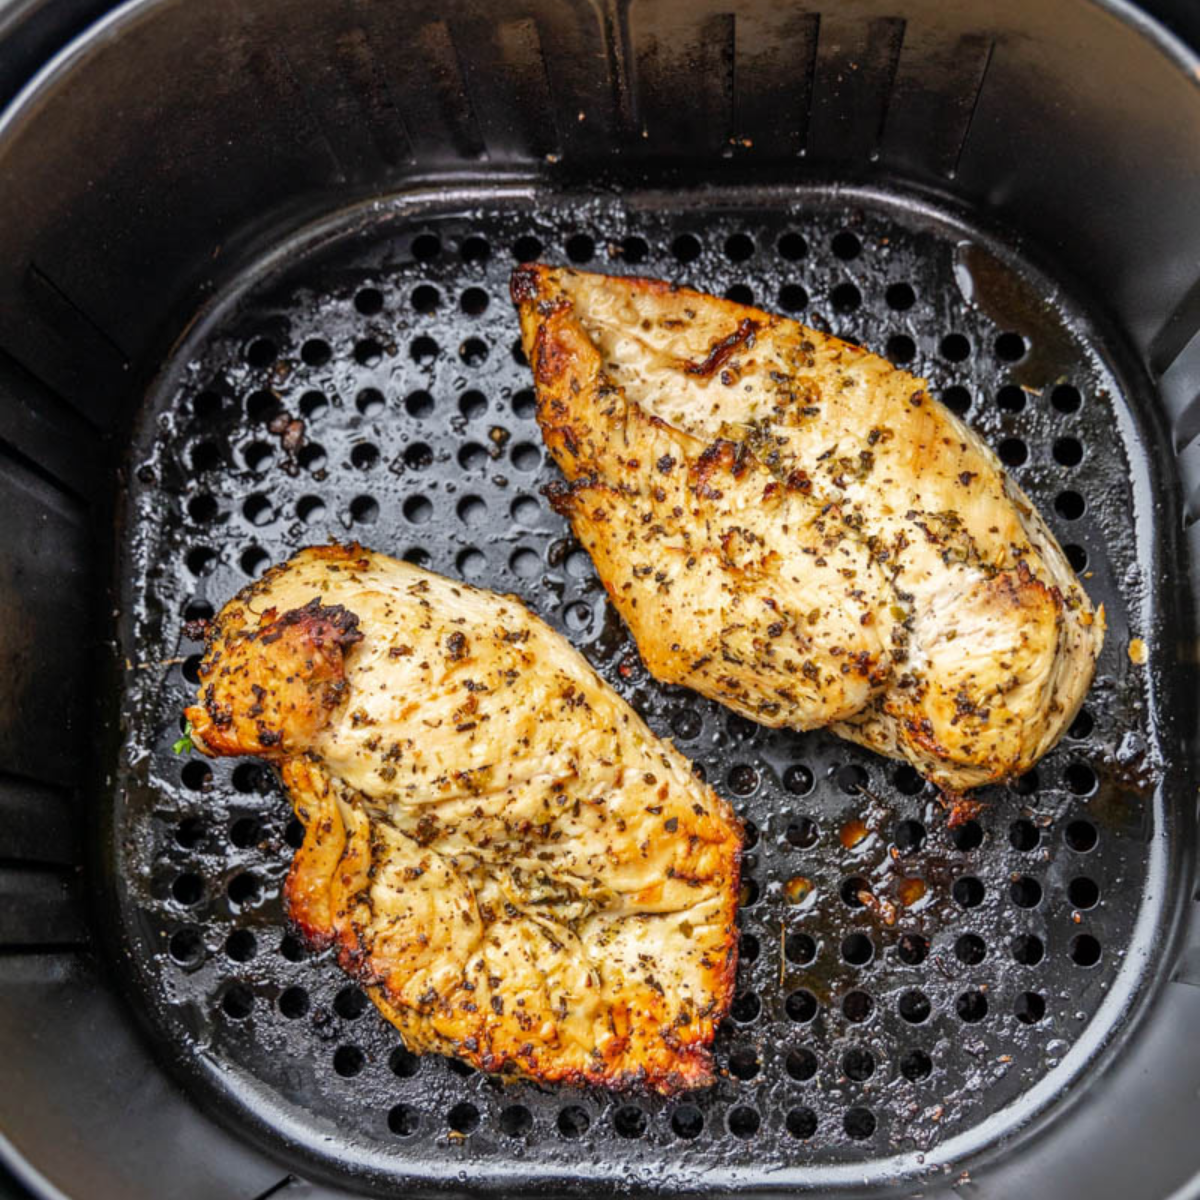 Decorative thumbnail preview image of Air Fryer Chicken Breasts.